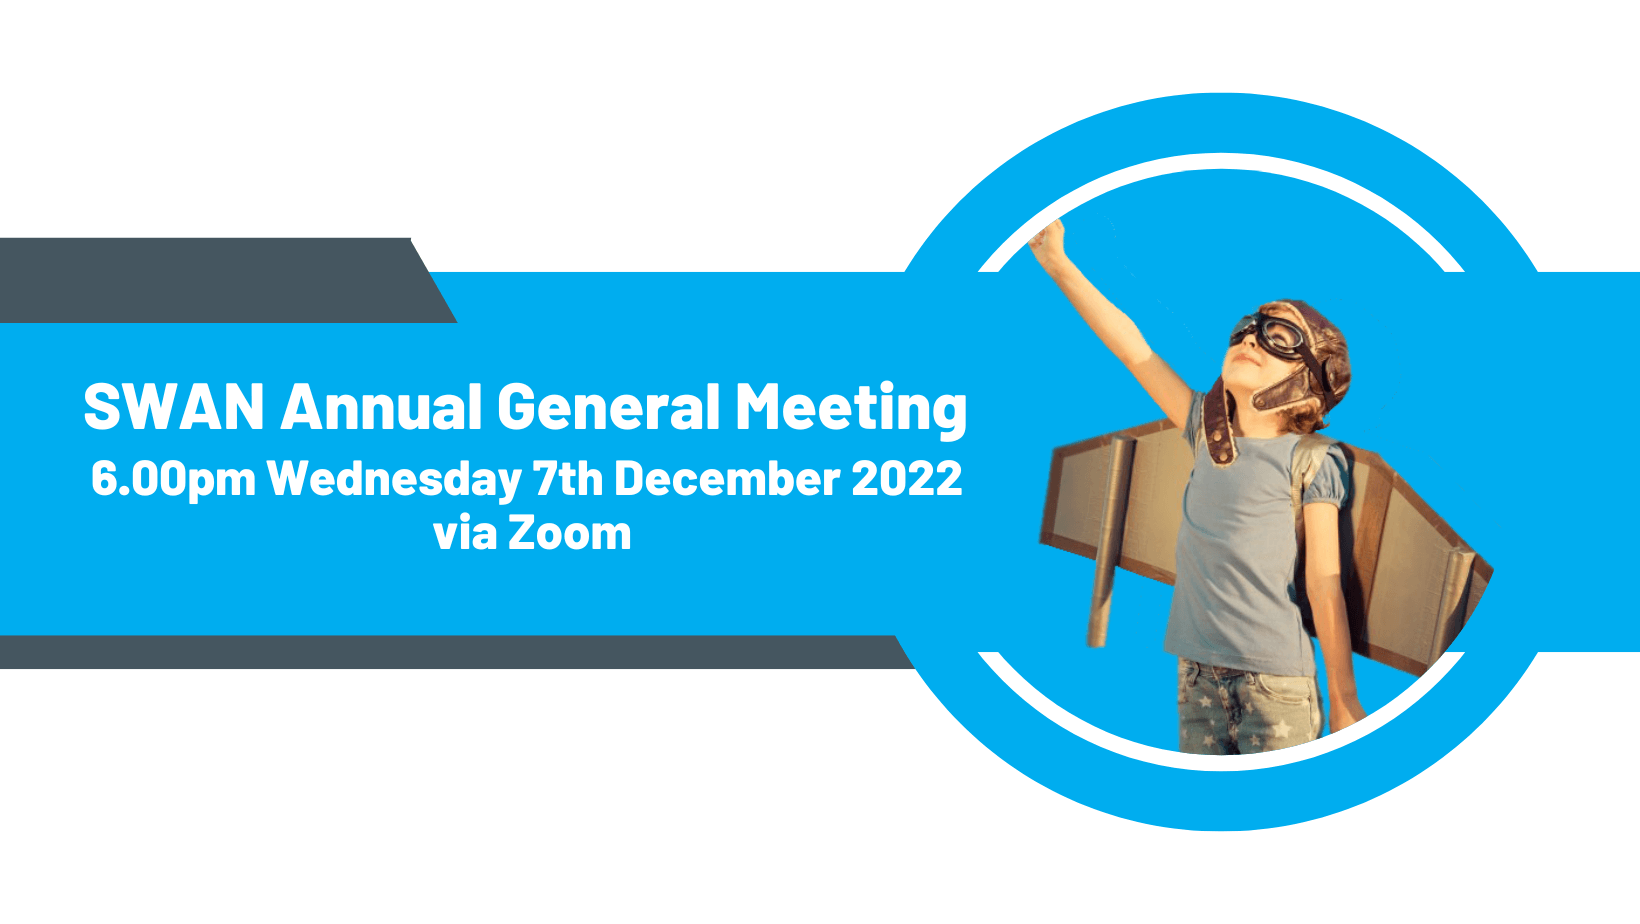 Image of a child wearing an aviation cap and goggles with cardboard wings on their back. They have a fist raised to the sky, looking up and smiling. The background is white, with a blue bar and white text reading 'SWAN Annual General Meeting 6.00pm Wednesday 7th December 2022 via Zoom'